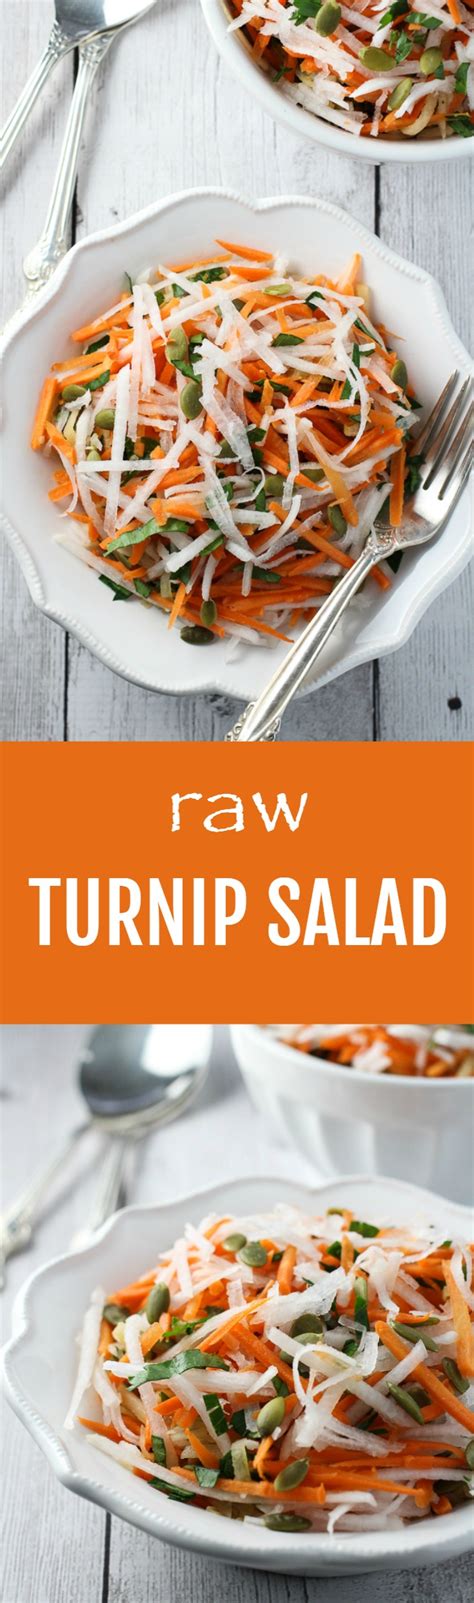 This Raw Turnip Salad Is Very Easy To Make All You Have To Do Is Grate